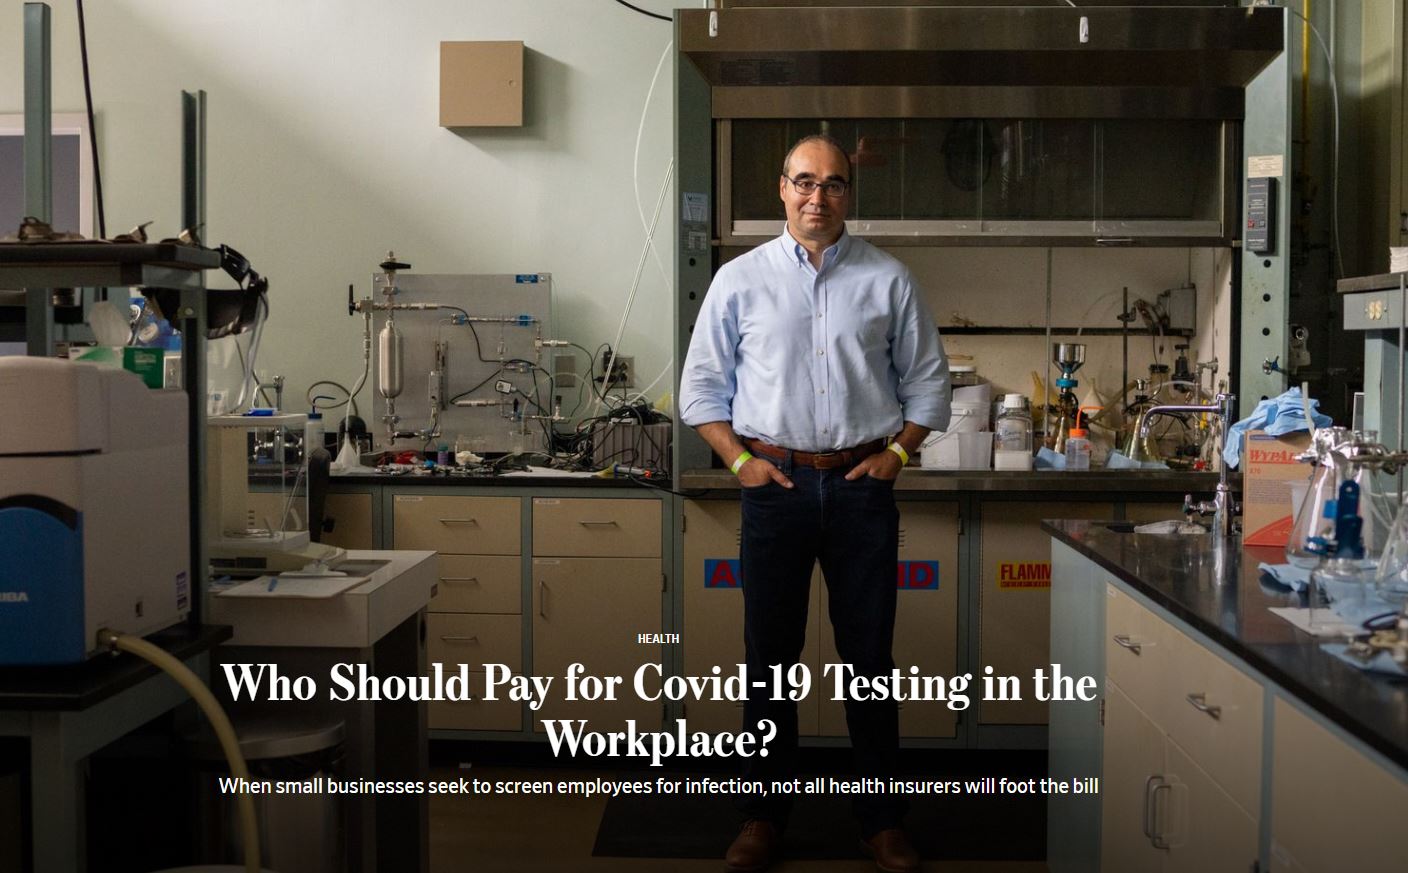 Who Should Pay for Covid-19 Testing in the Workplace? - Mott Corporation